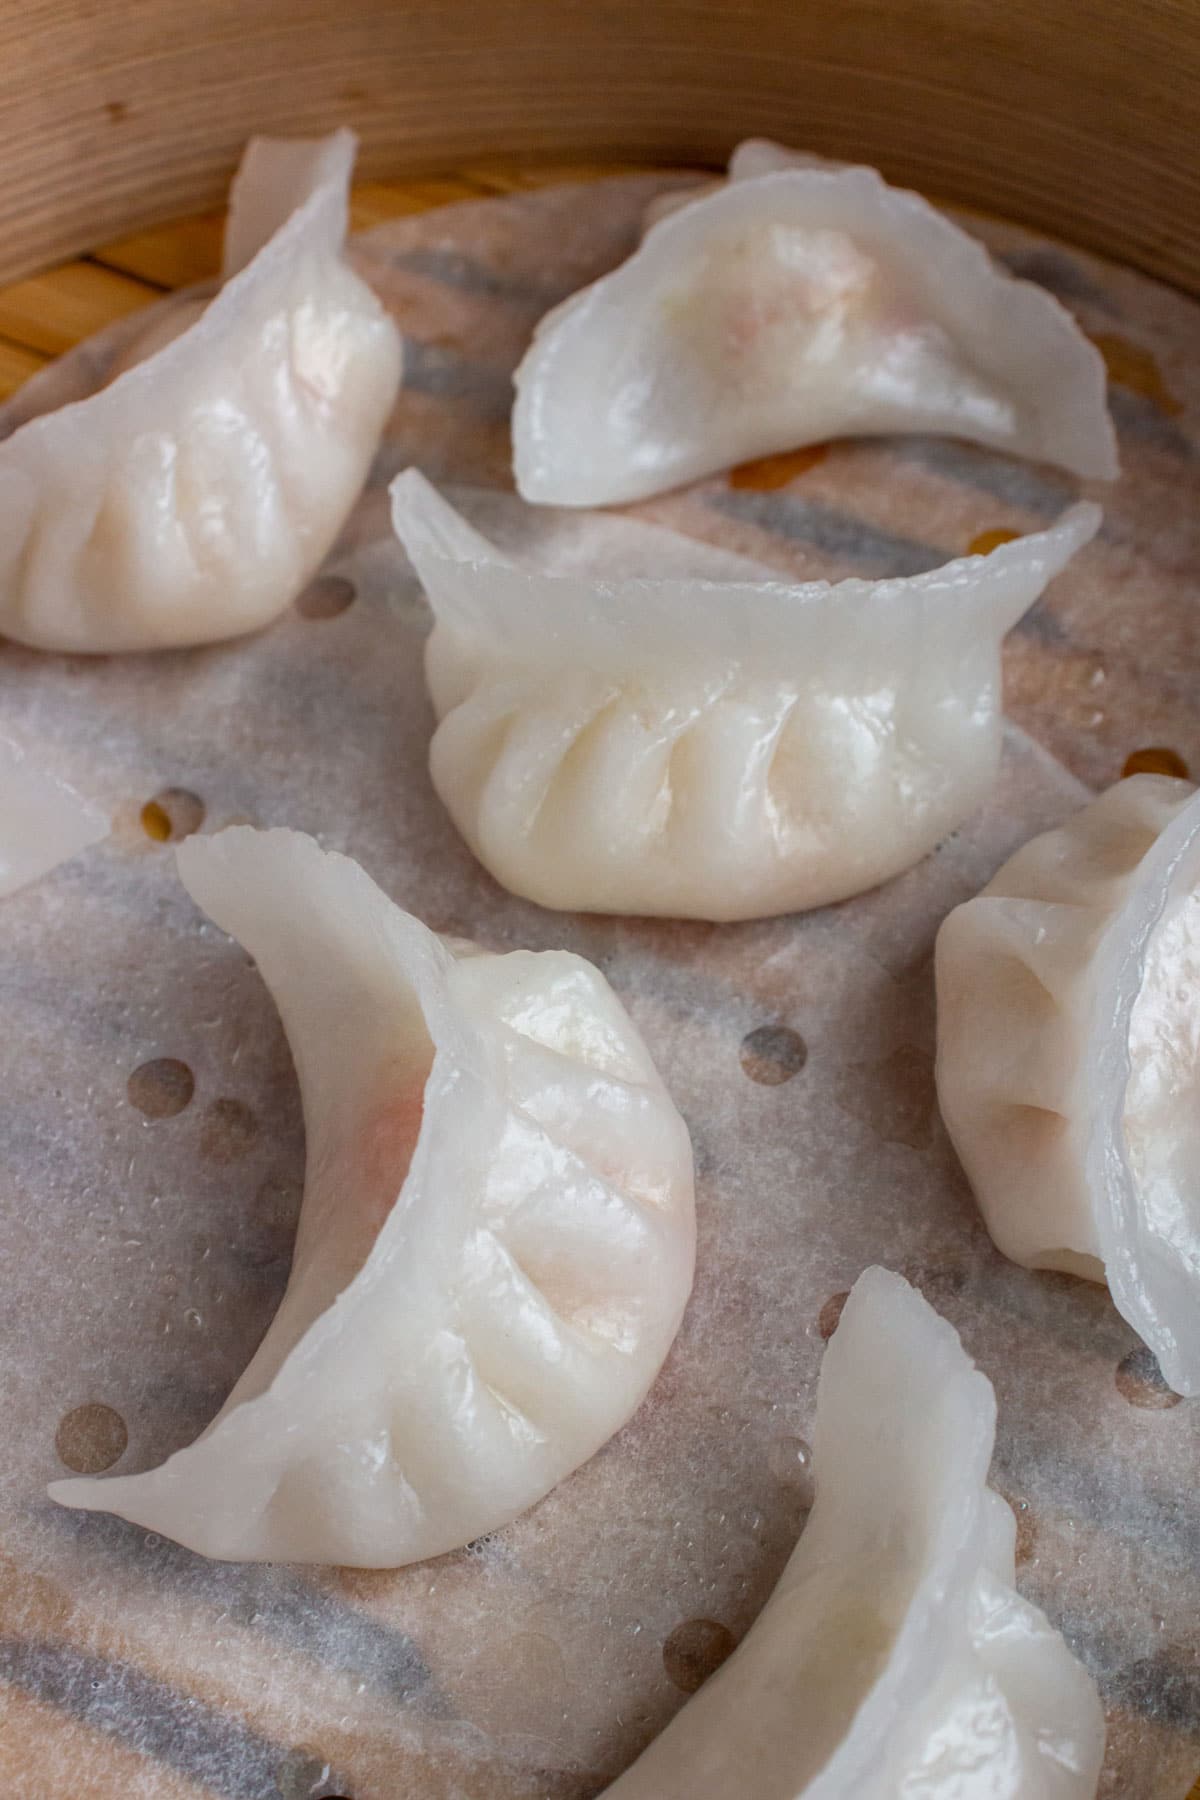 Closeup of white crystal shrimp dumplings with crescent shapes in a bamboo steamer basket.